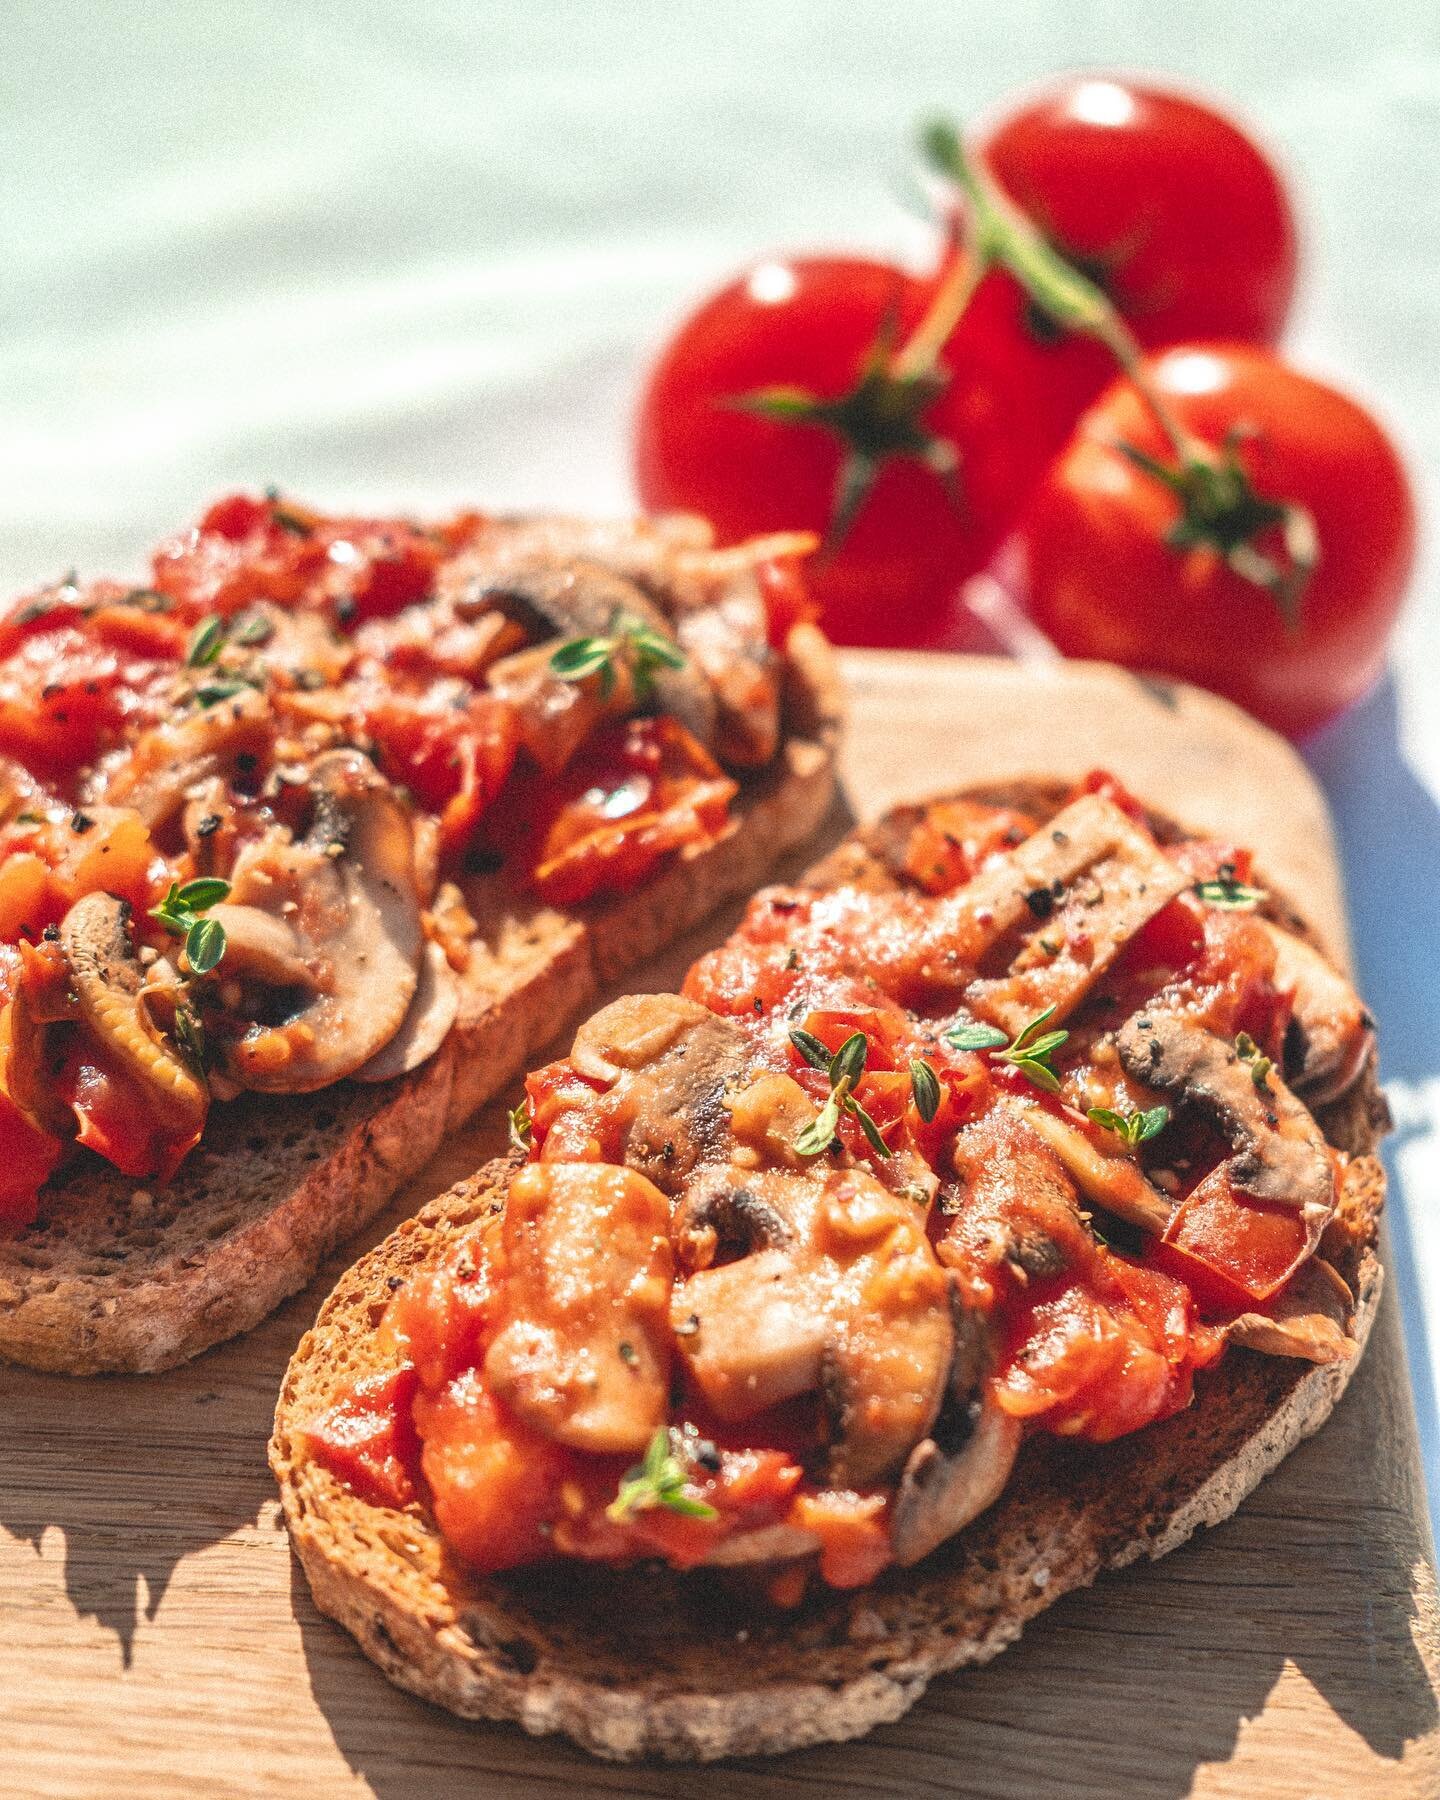 You really can't beat British tomatoes and mushrooms on toast. This recipe by @missasnate is quick and easy to make and the perfect Sunday brunch option #tomsontoast #BTF21 

British Tomatoes and Mushrooms on Toast
 
Preparation time: 5 minutes
Cooki